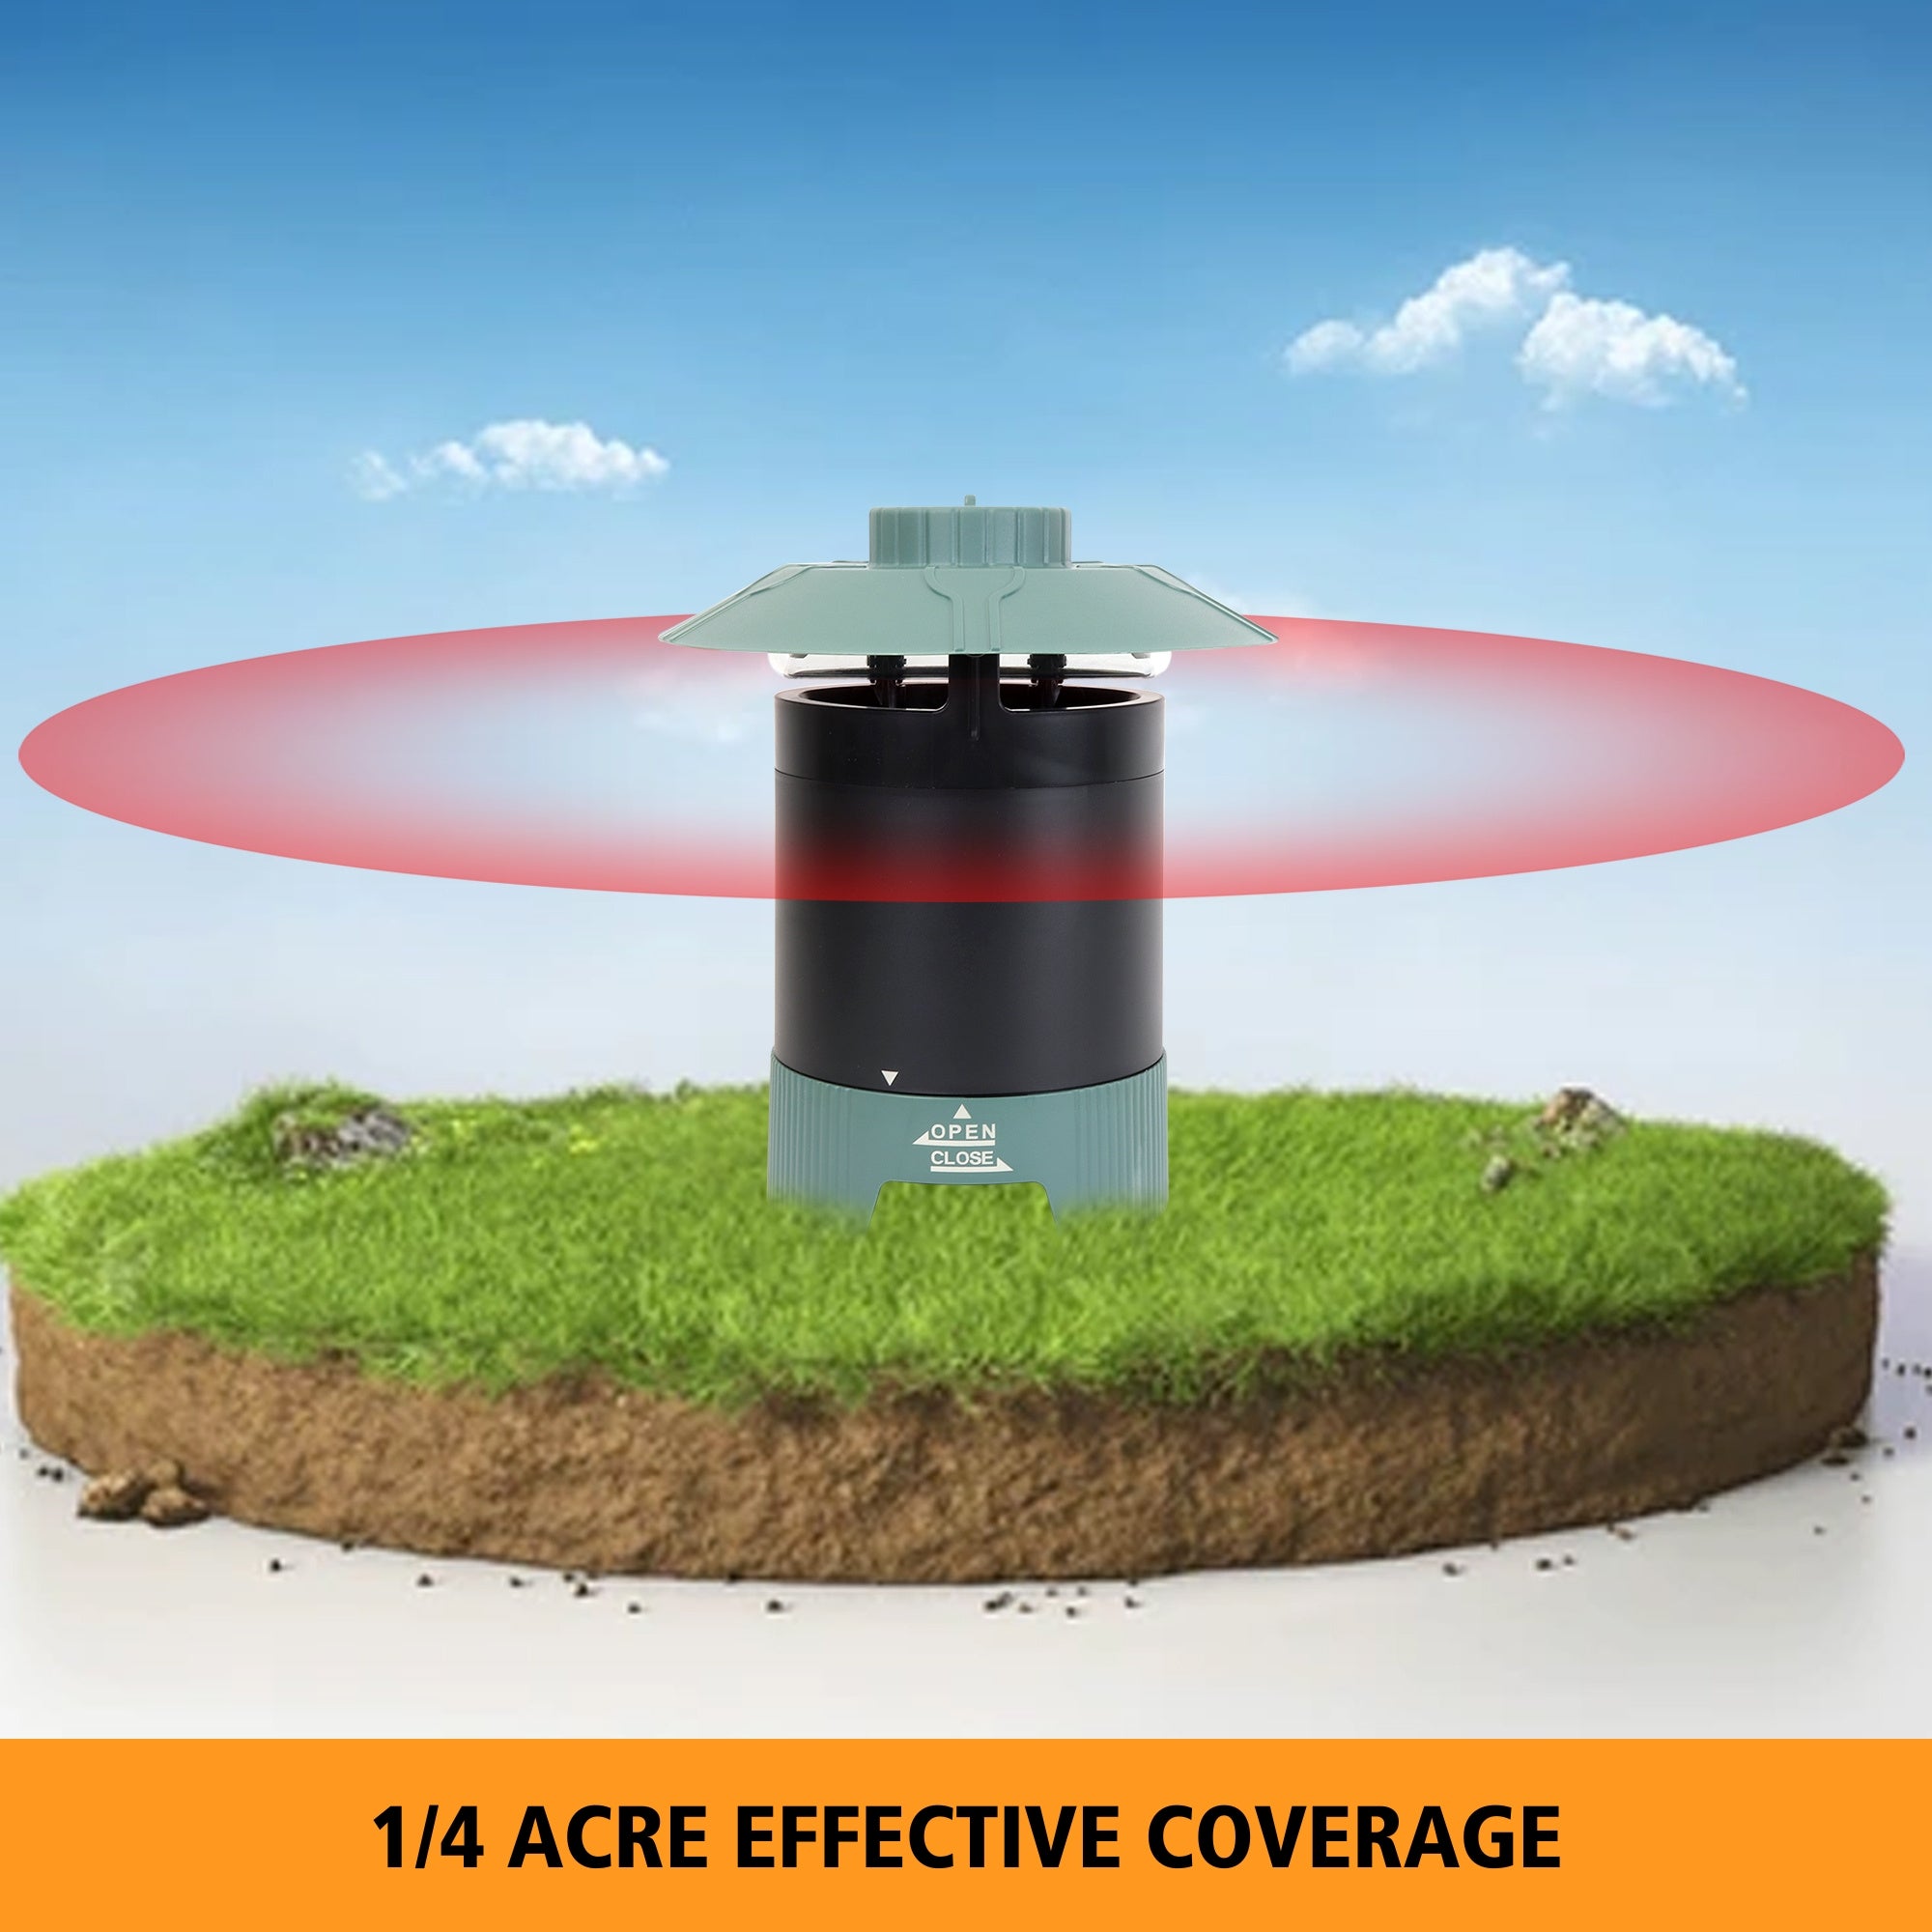 Bite Shield Protector 1/4 acre mosquito trap with grass below and blue sky in the background and a red ring around indicating the coverage area. Text below reads, "1/4 acre effective coverage"